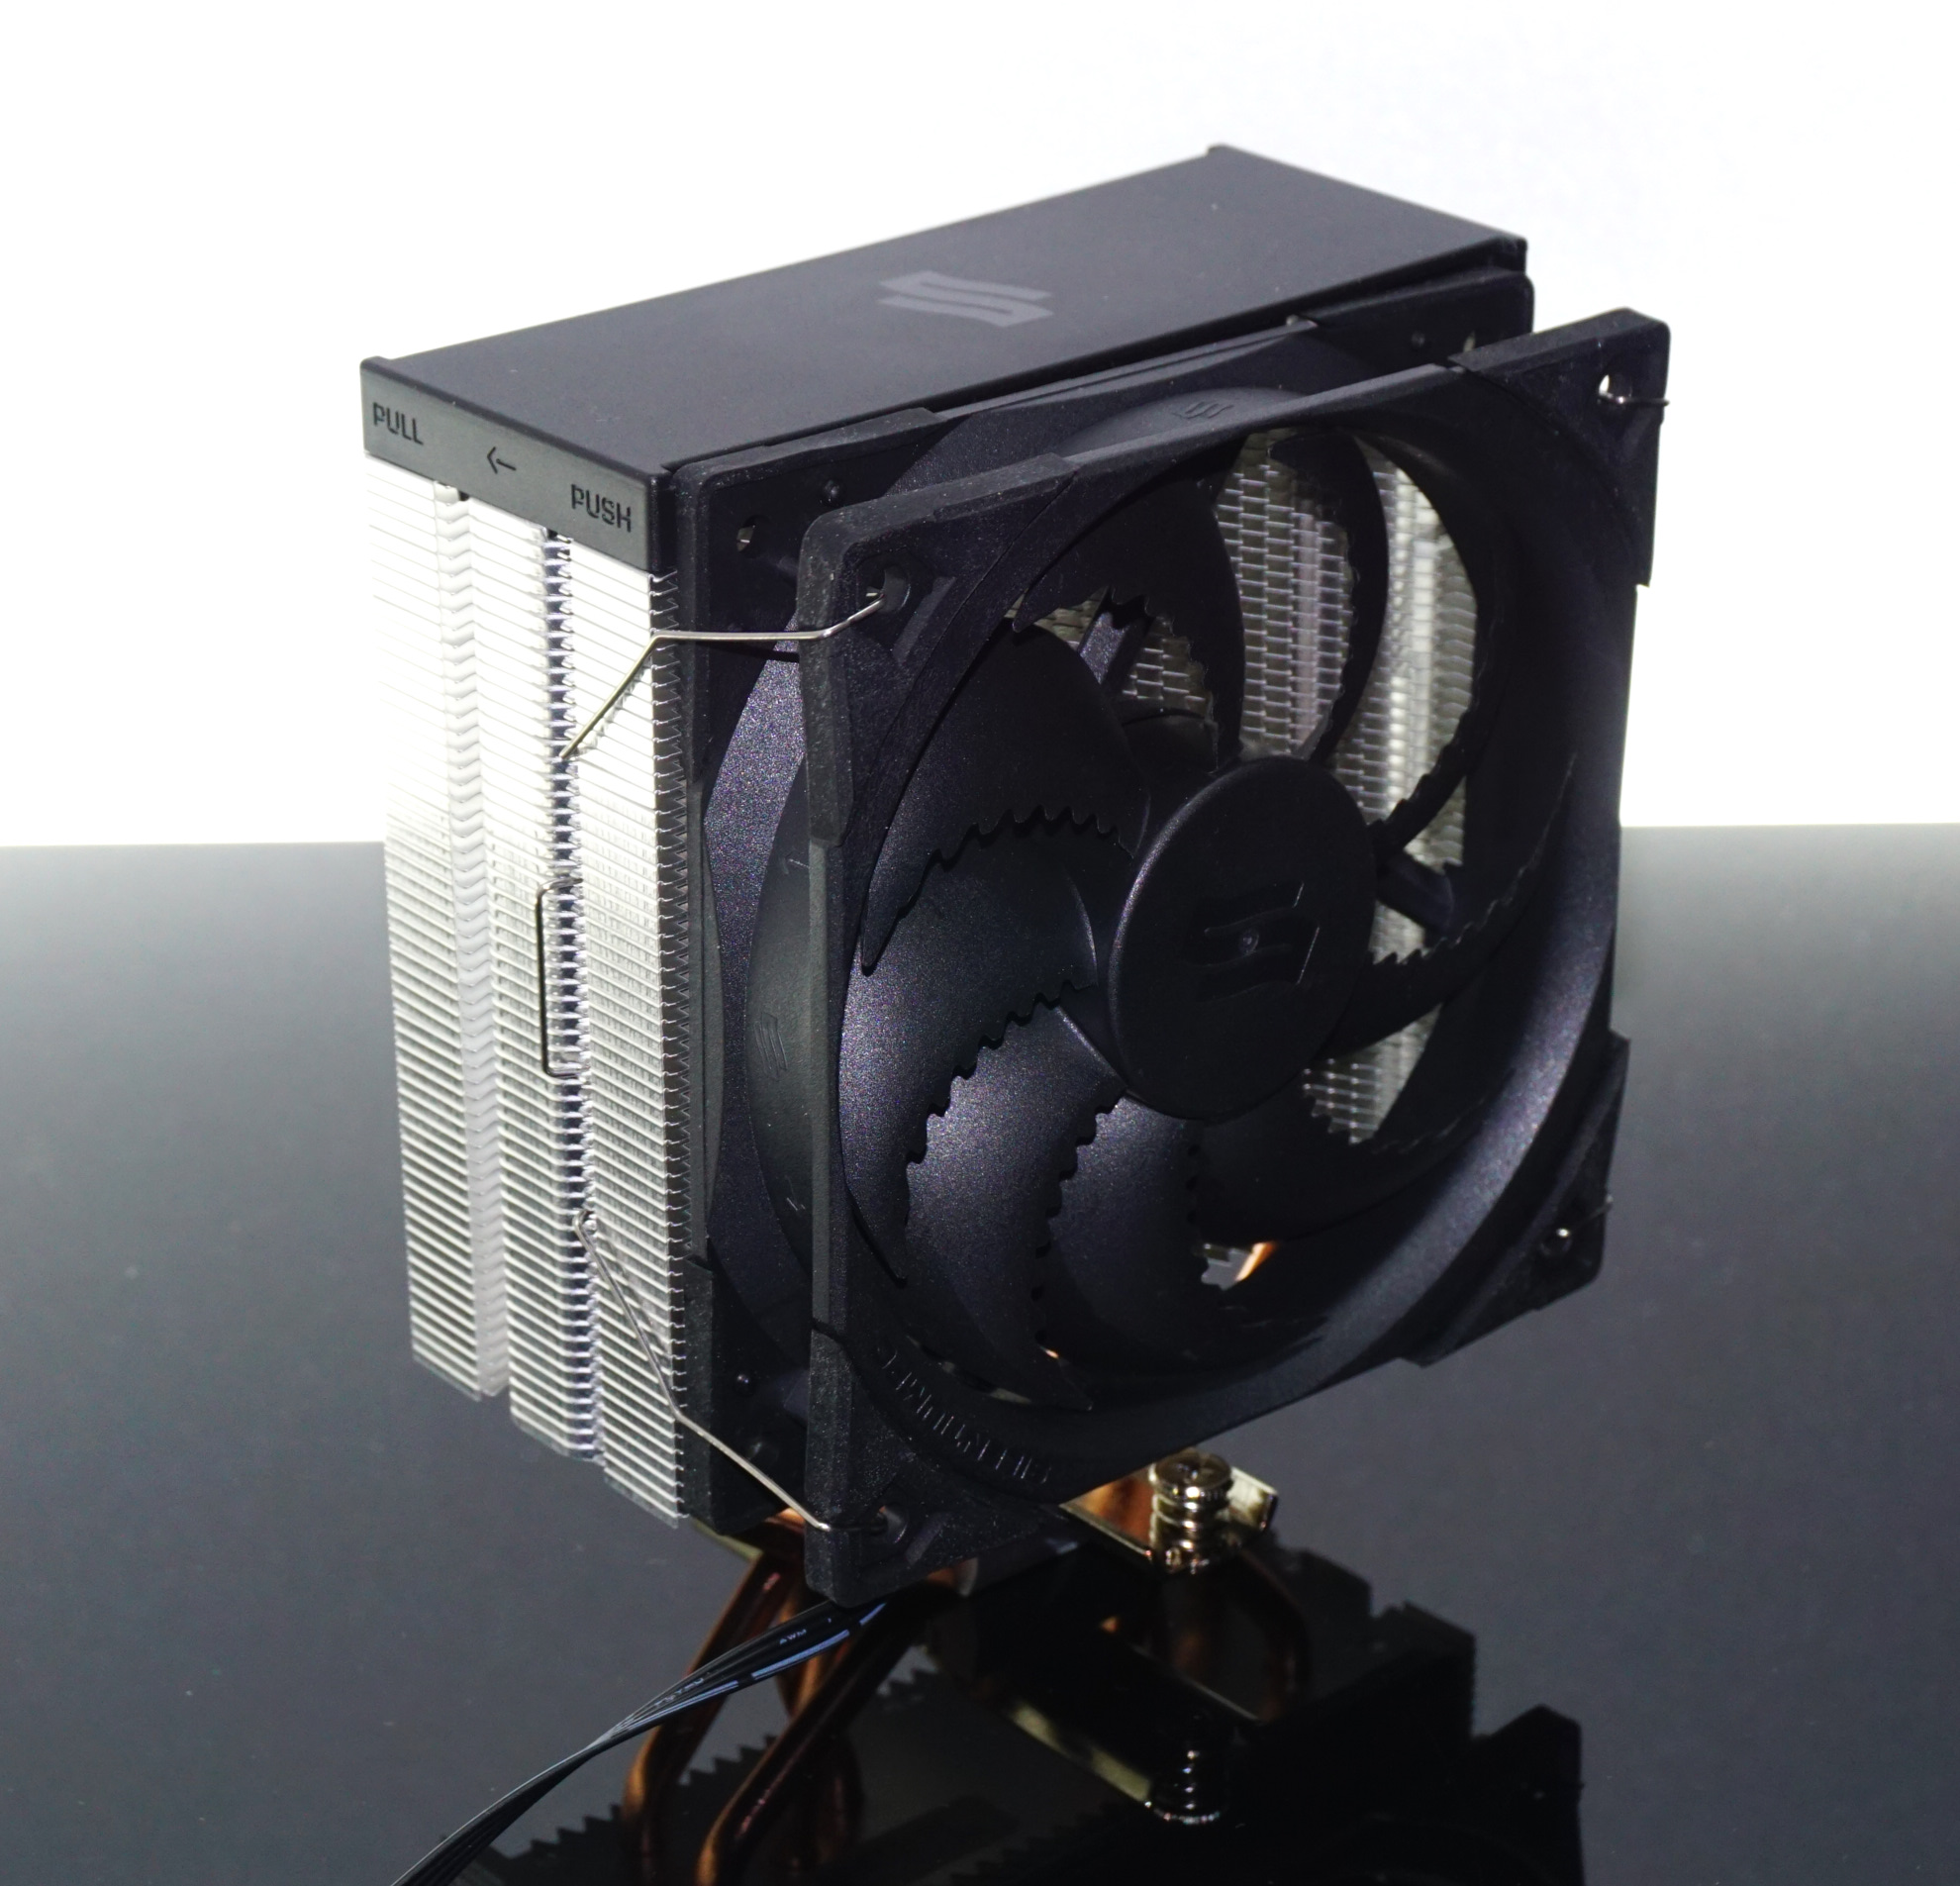 Cooler Master Hyper 212 RGB Black Edition Air Cooler Review - PC Perspective